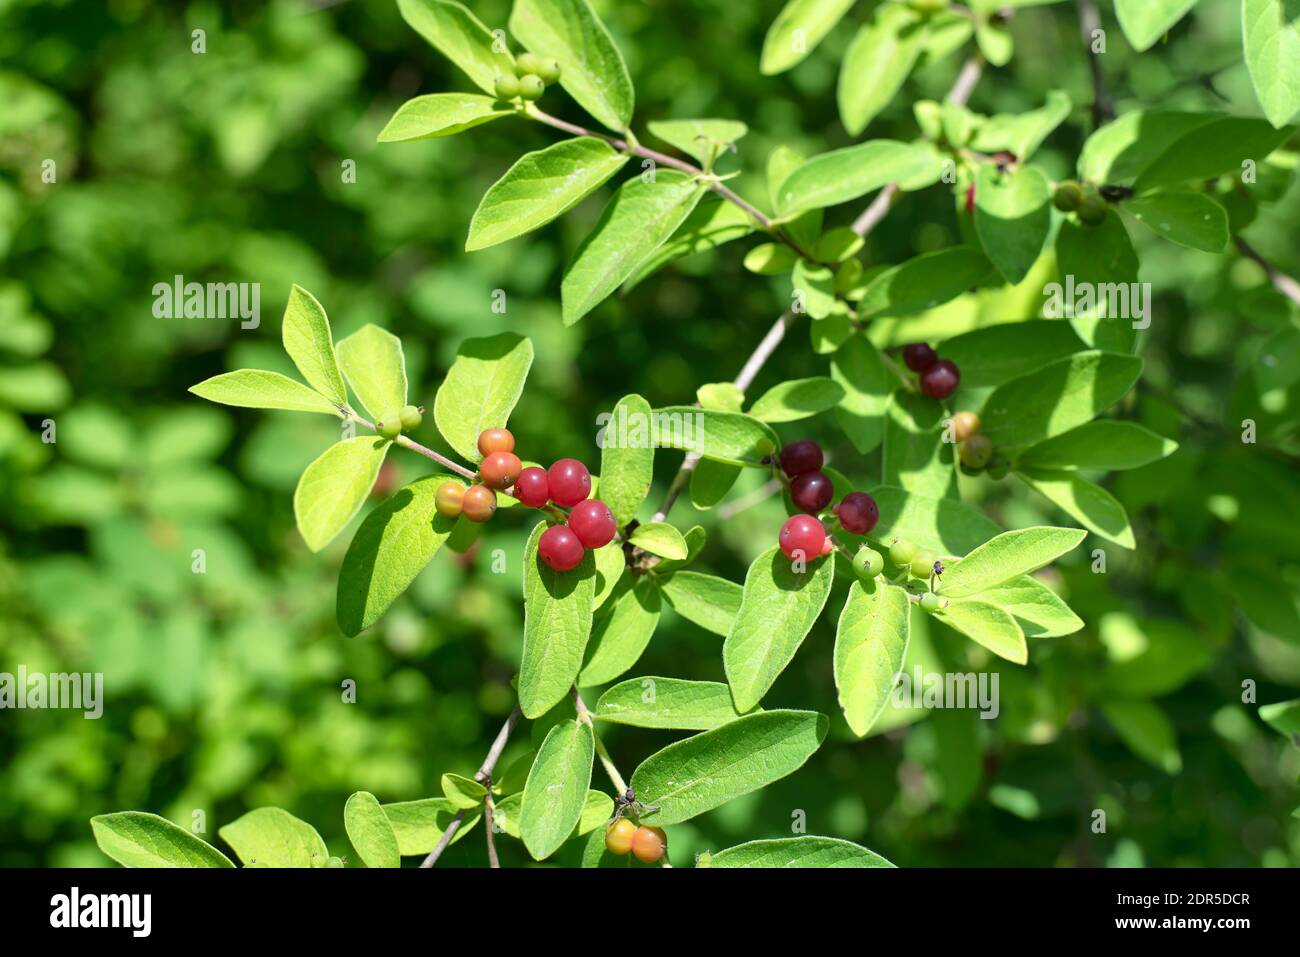 Red berries and leaves growing on a tatarian honeysuckle, Lonicera tatarica, growing in topsmead state park in litchfield connecticut. Stock Photo